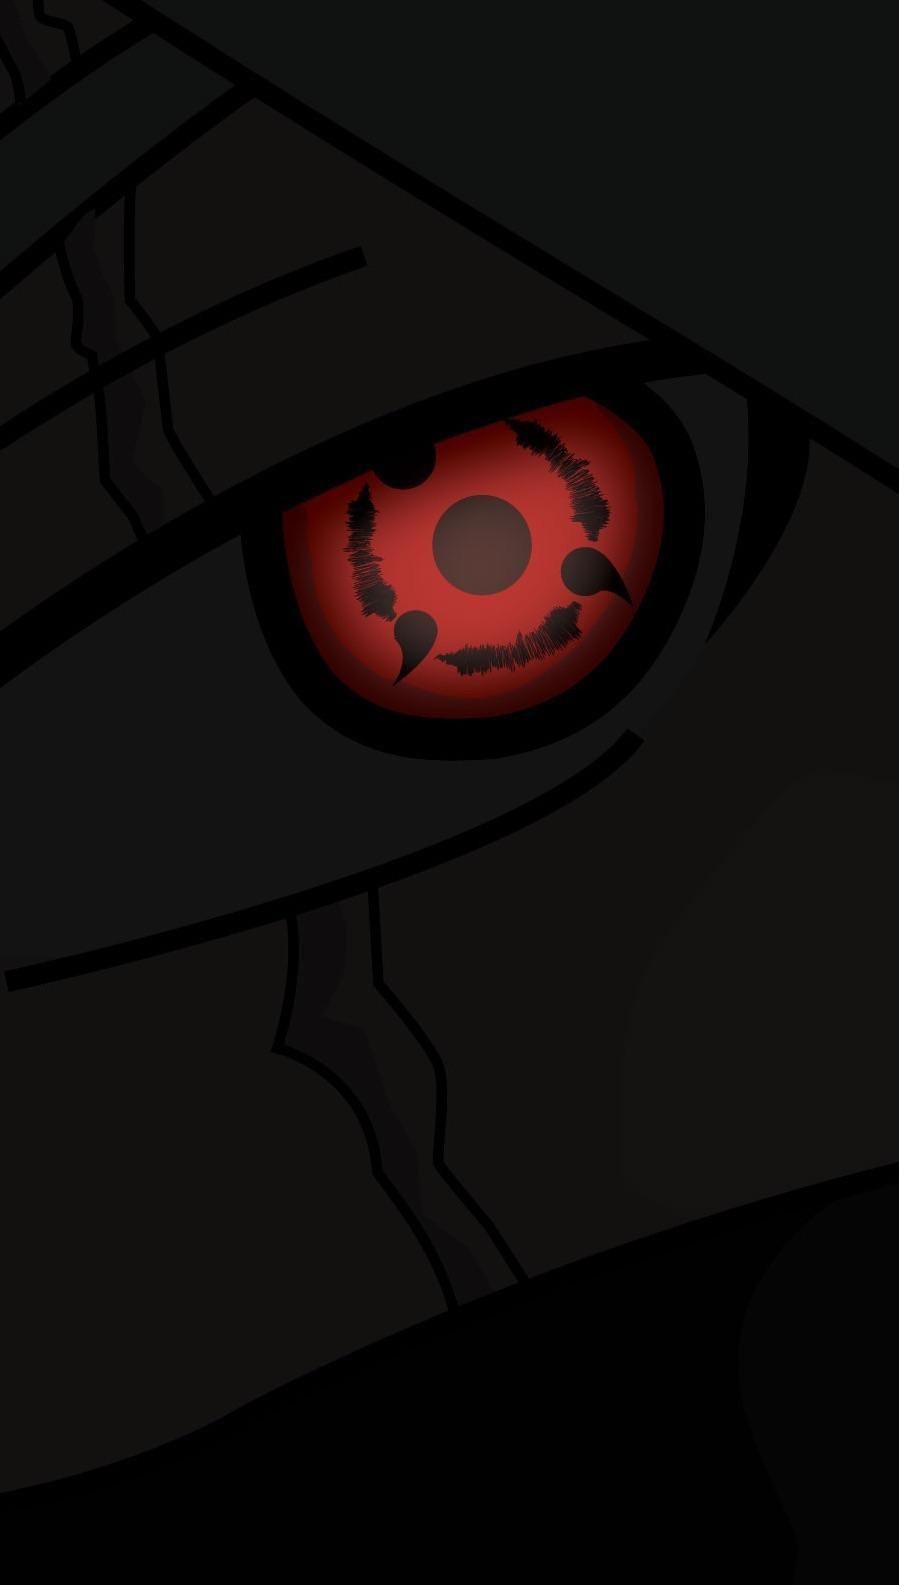 This sharingan activates when you pick up your phone